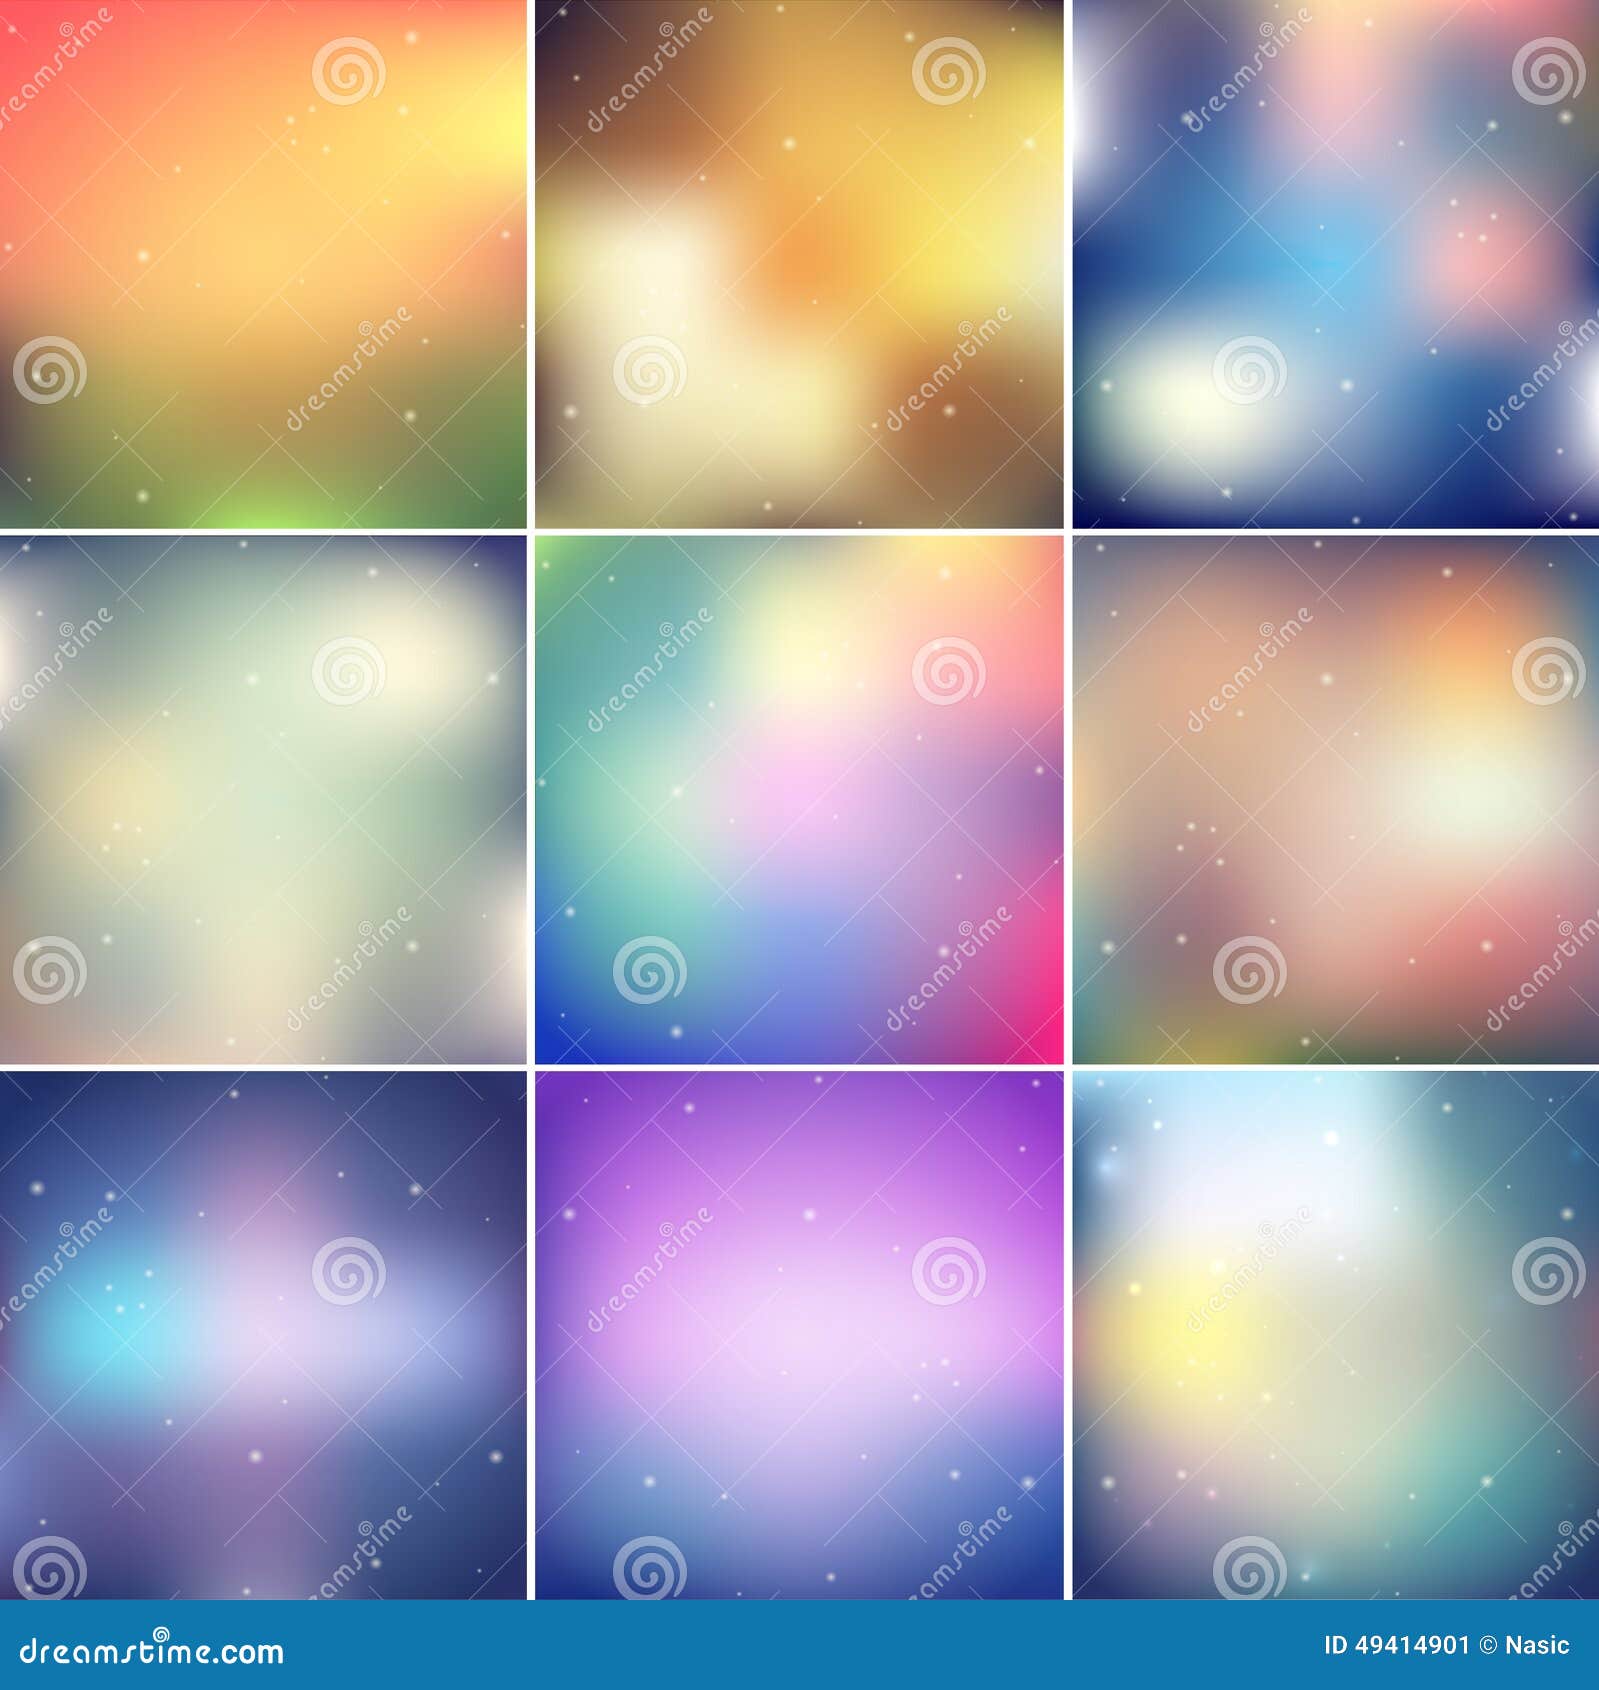 blur backgrounds pack